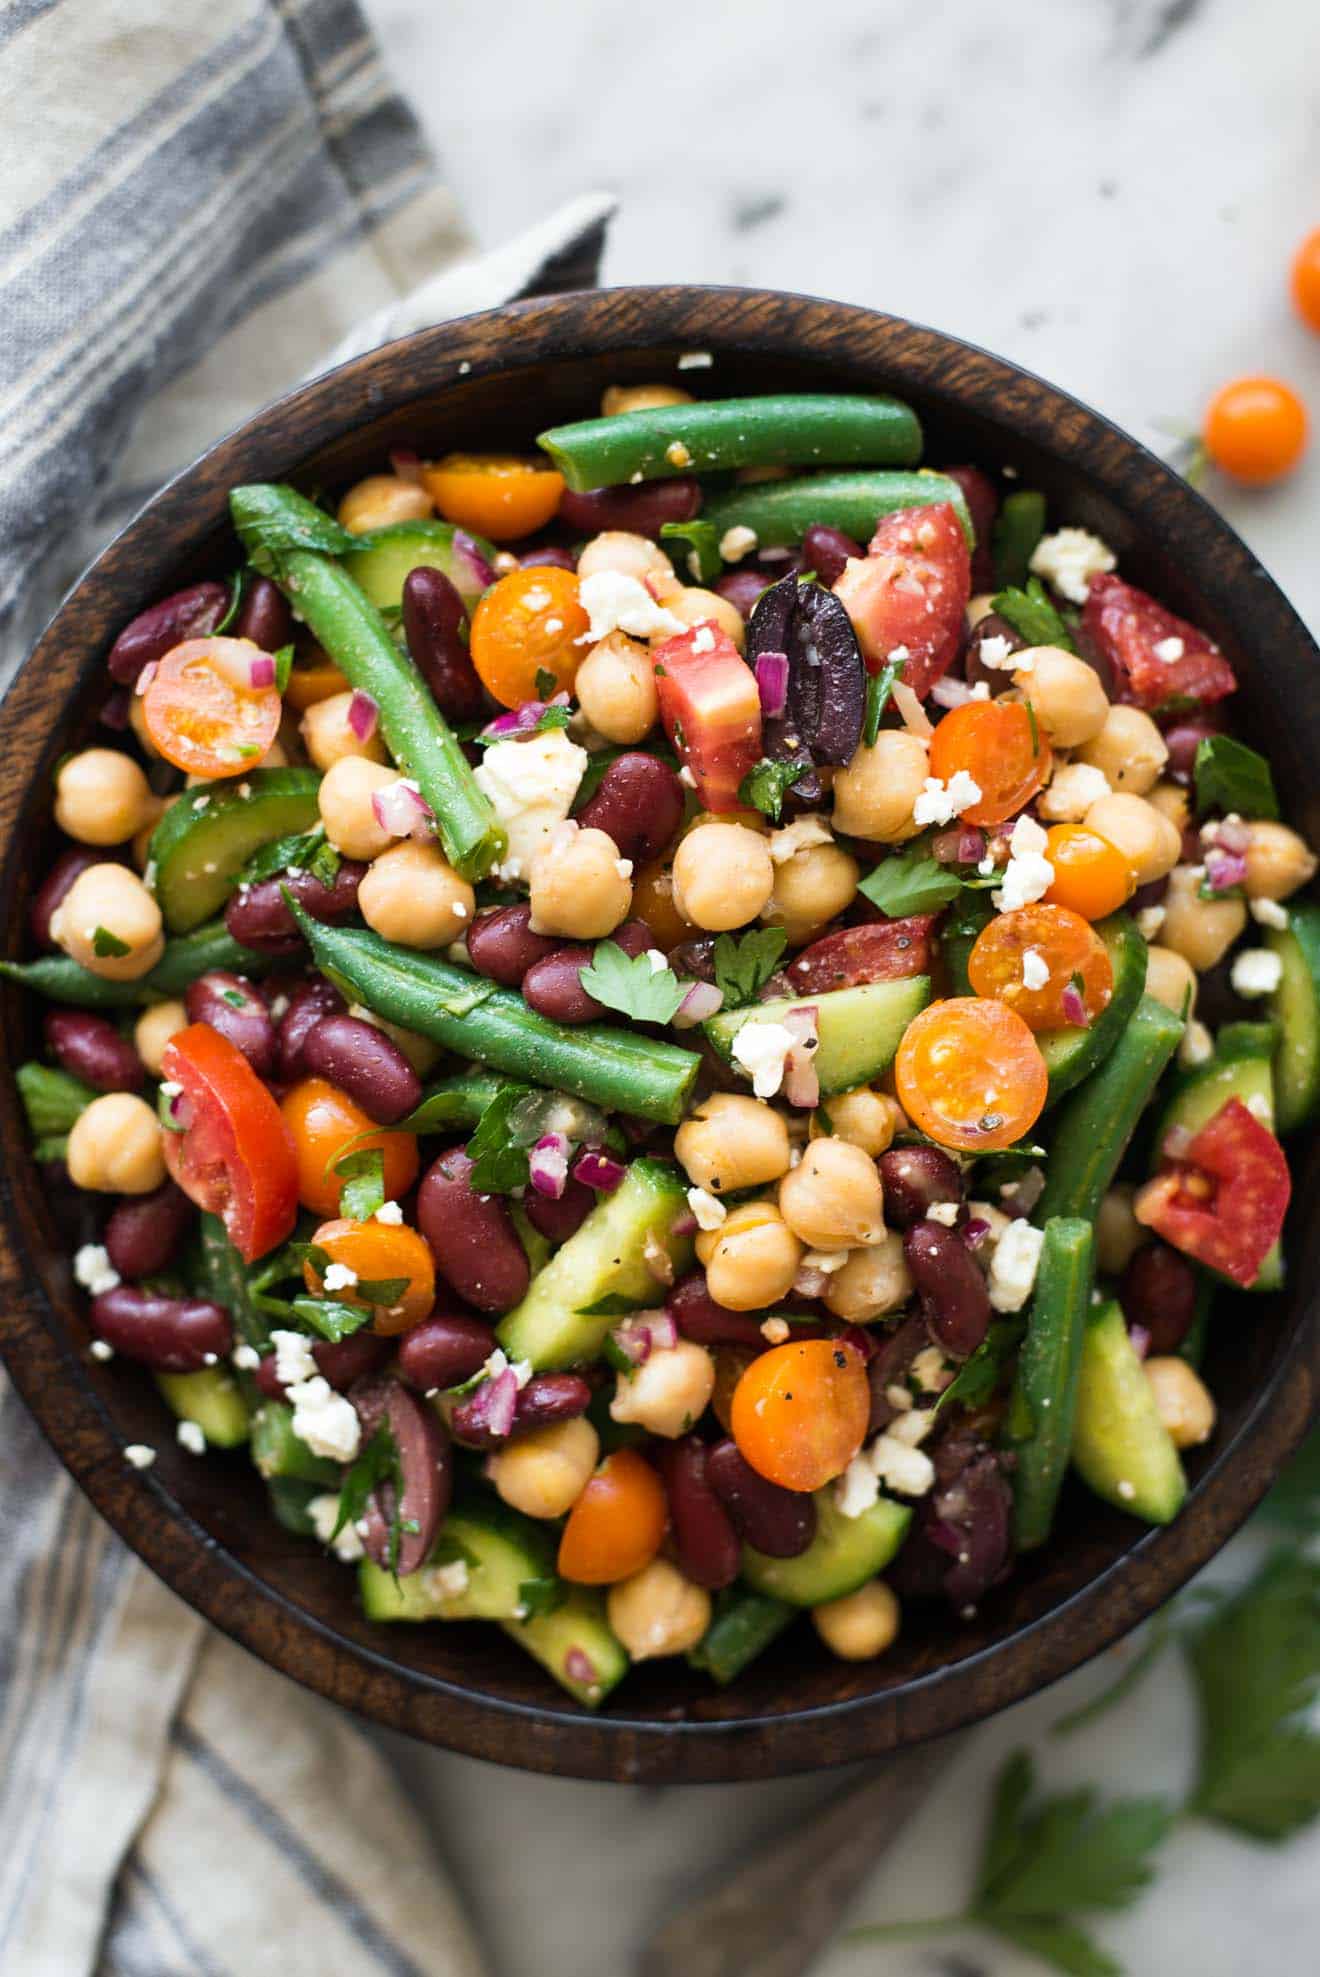 Healthy Three Bean Salad Recipe - this delicious, healthy salad is great as a side or a main meal!